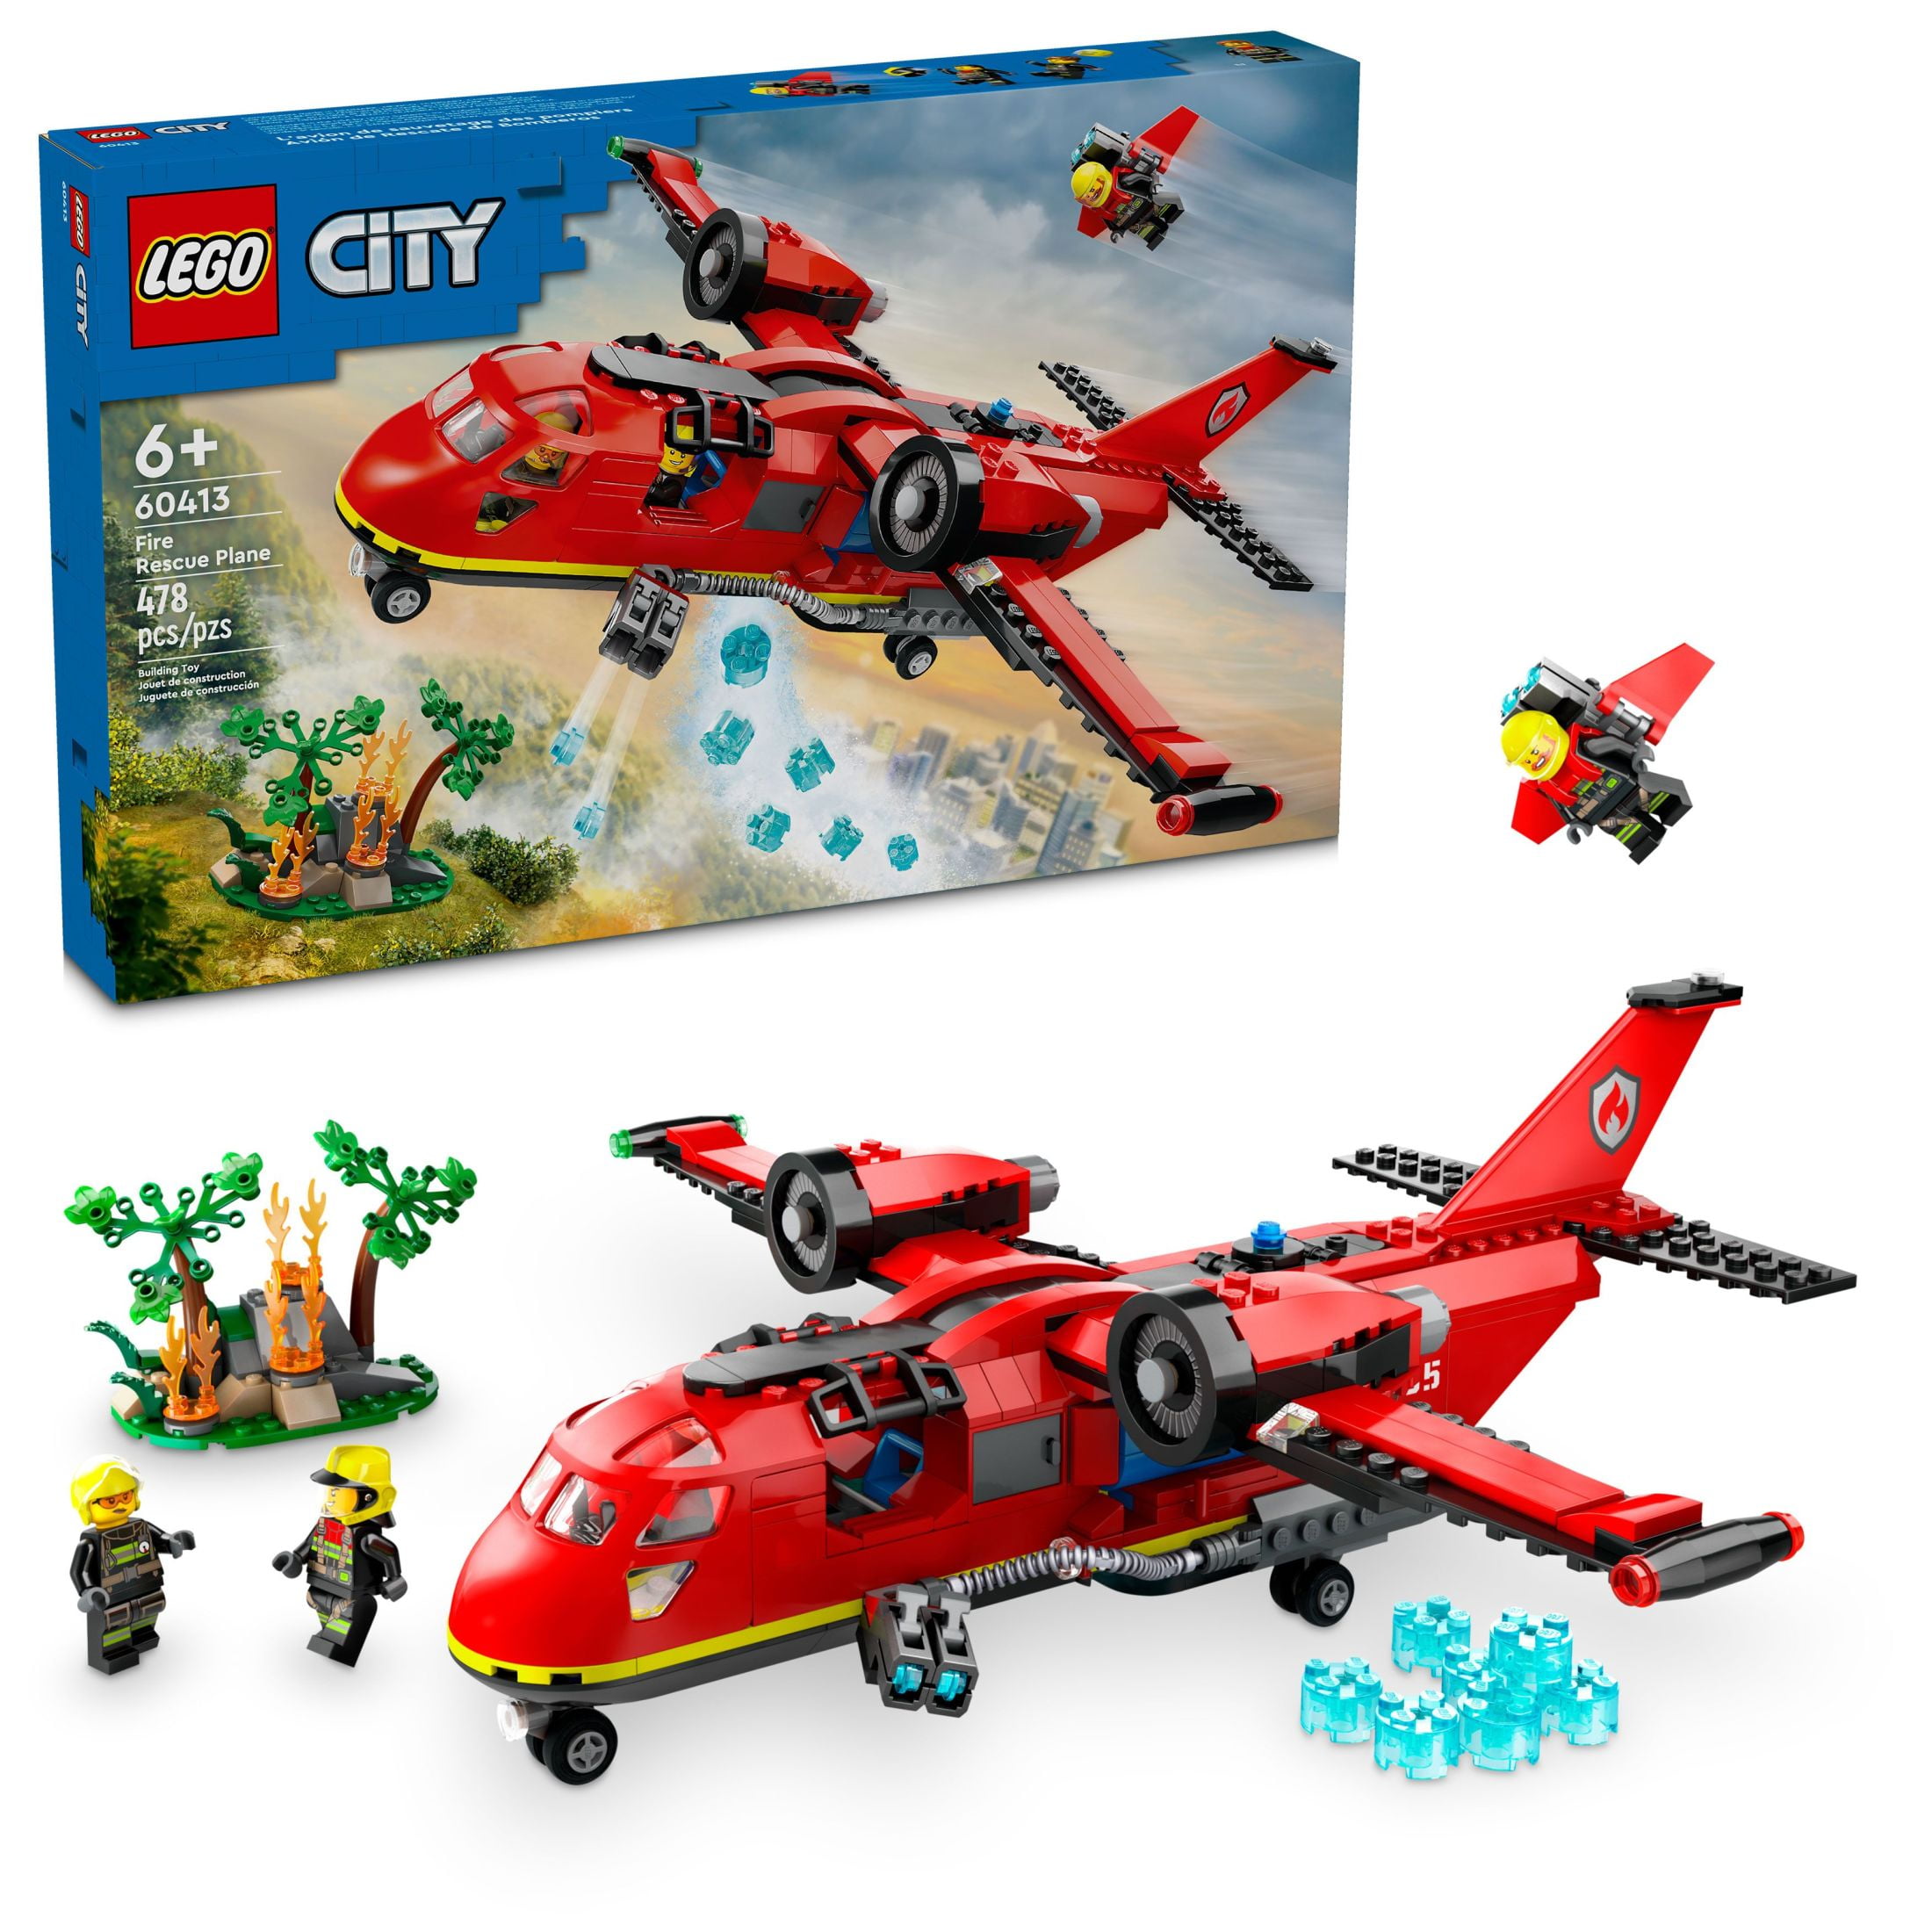 LEGO City Passenger Airplane 60262 Buildin Toy for Kids Ages 6+